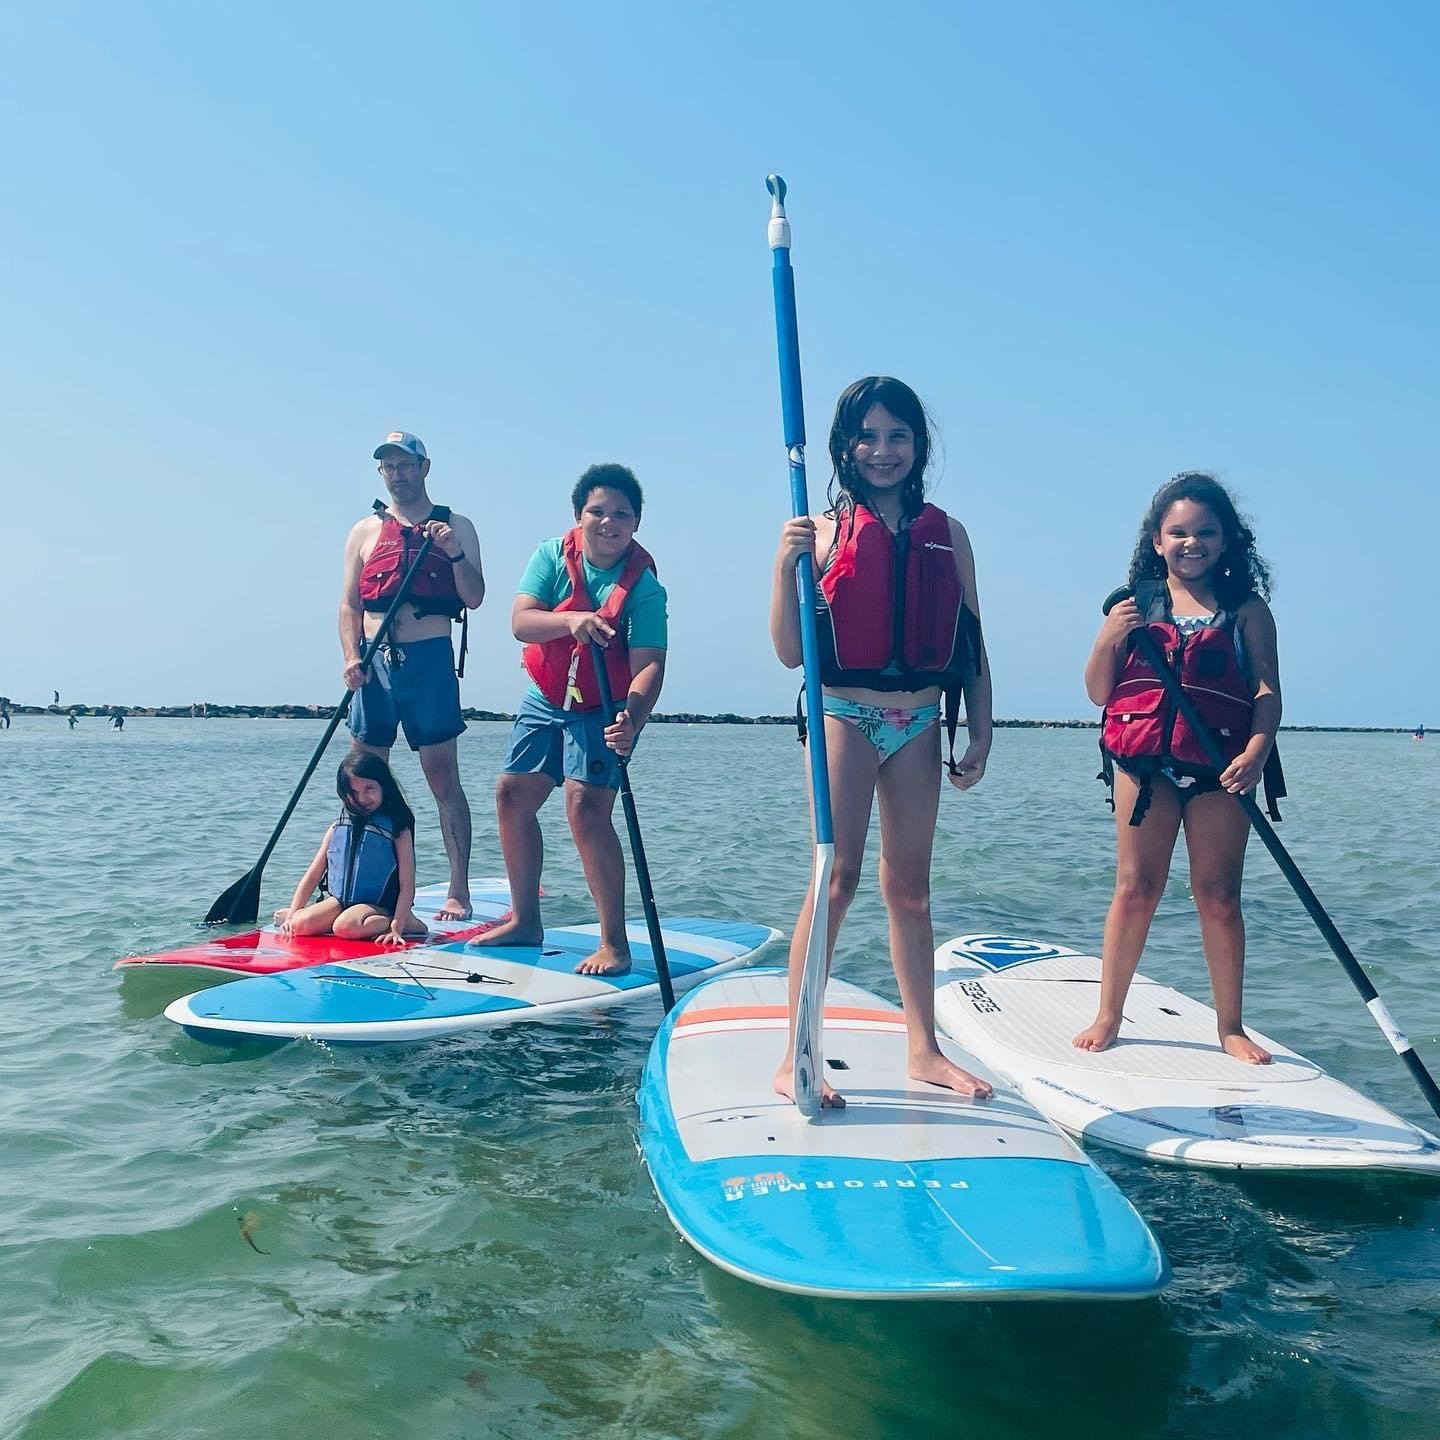 Paddle-boarding on the Fourth. From left, Matt Mannino, Cecily Mannino, Kai Graves, Lucia Mannino and Mia Graves.